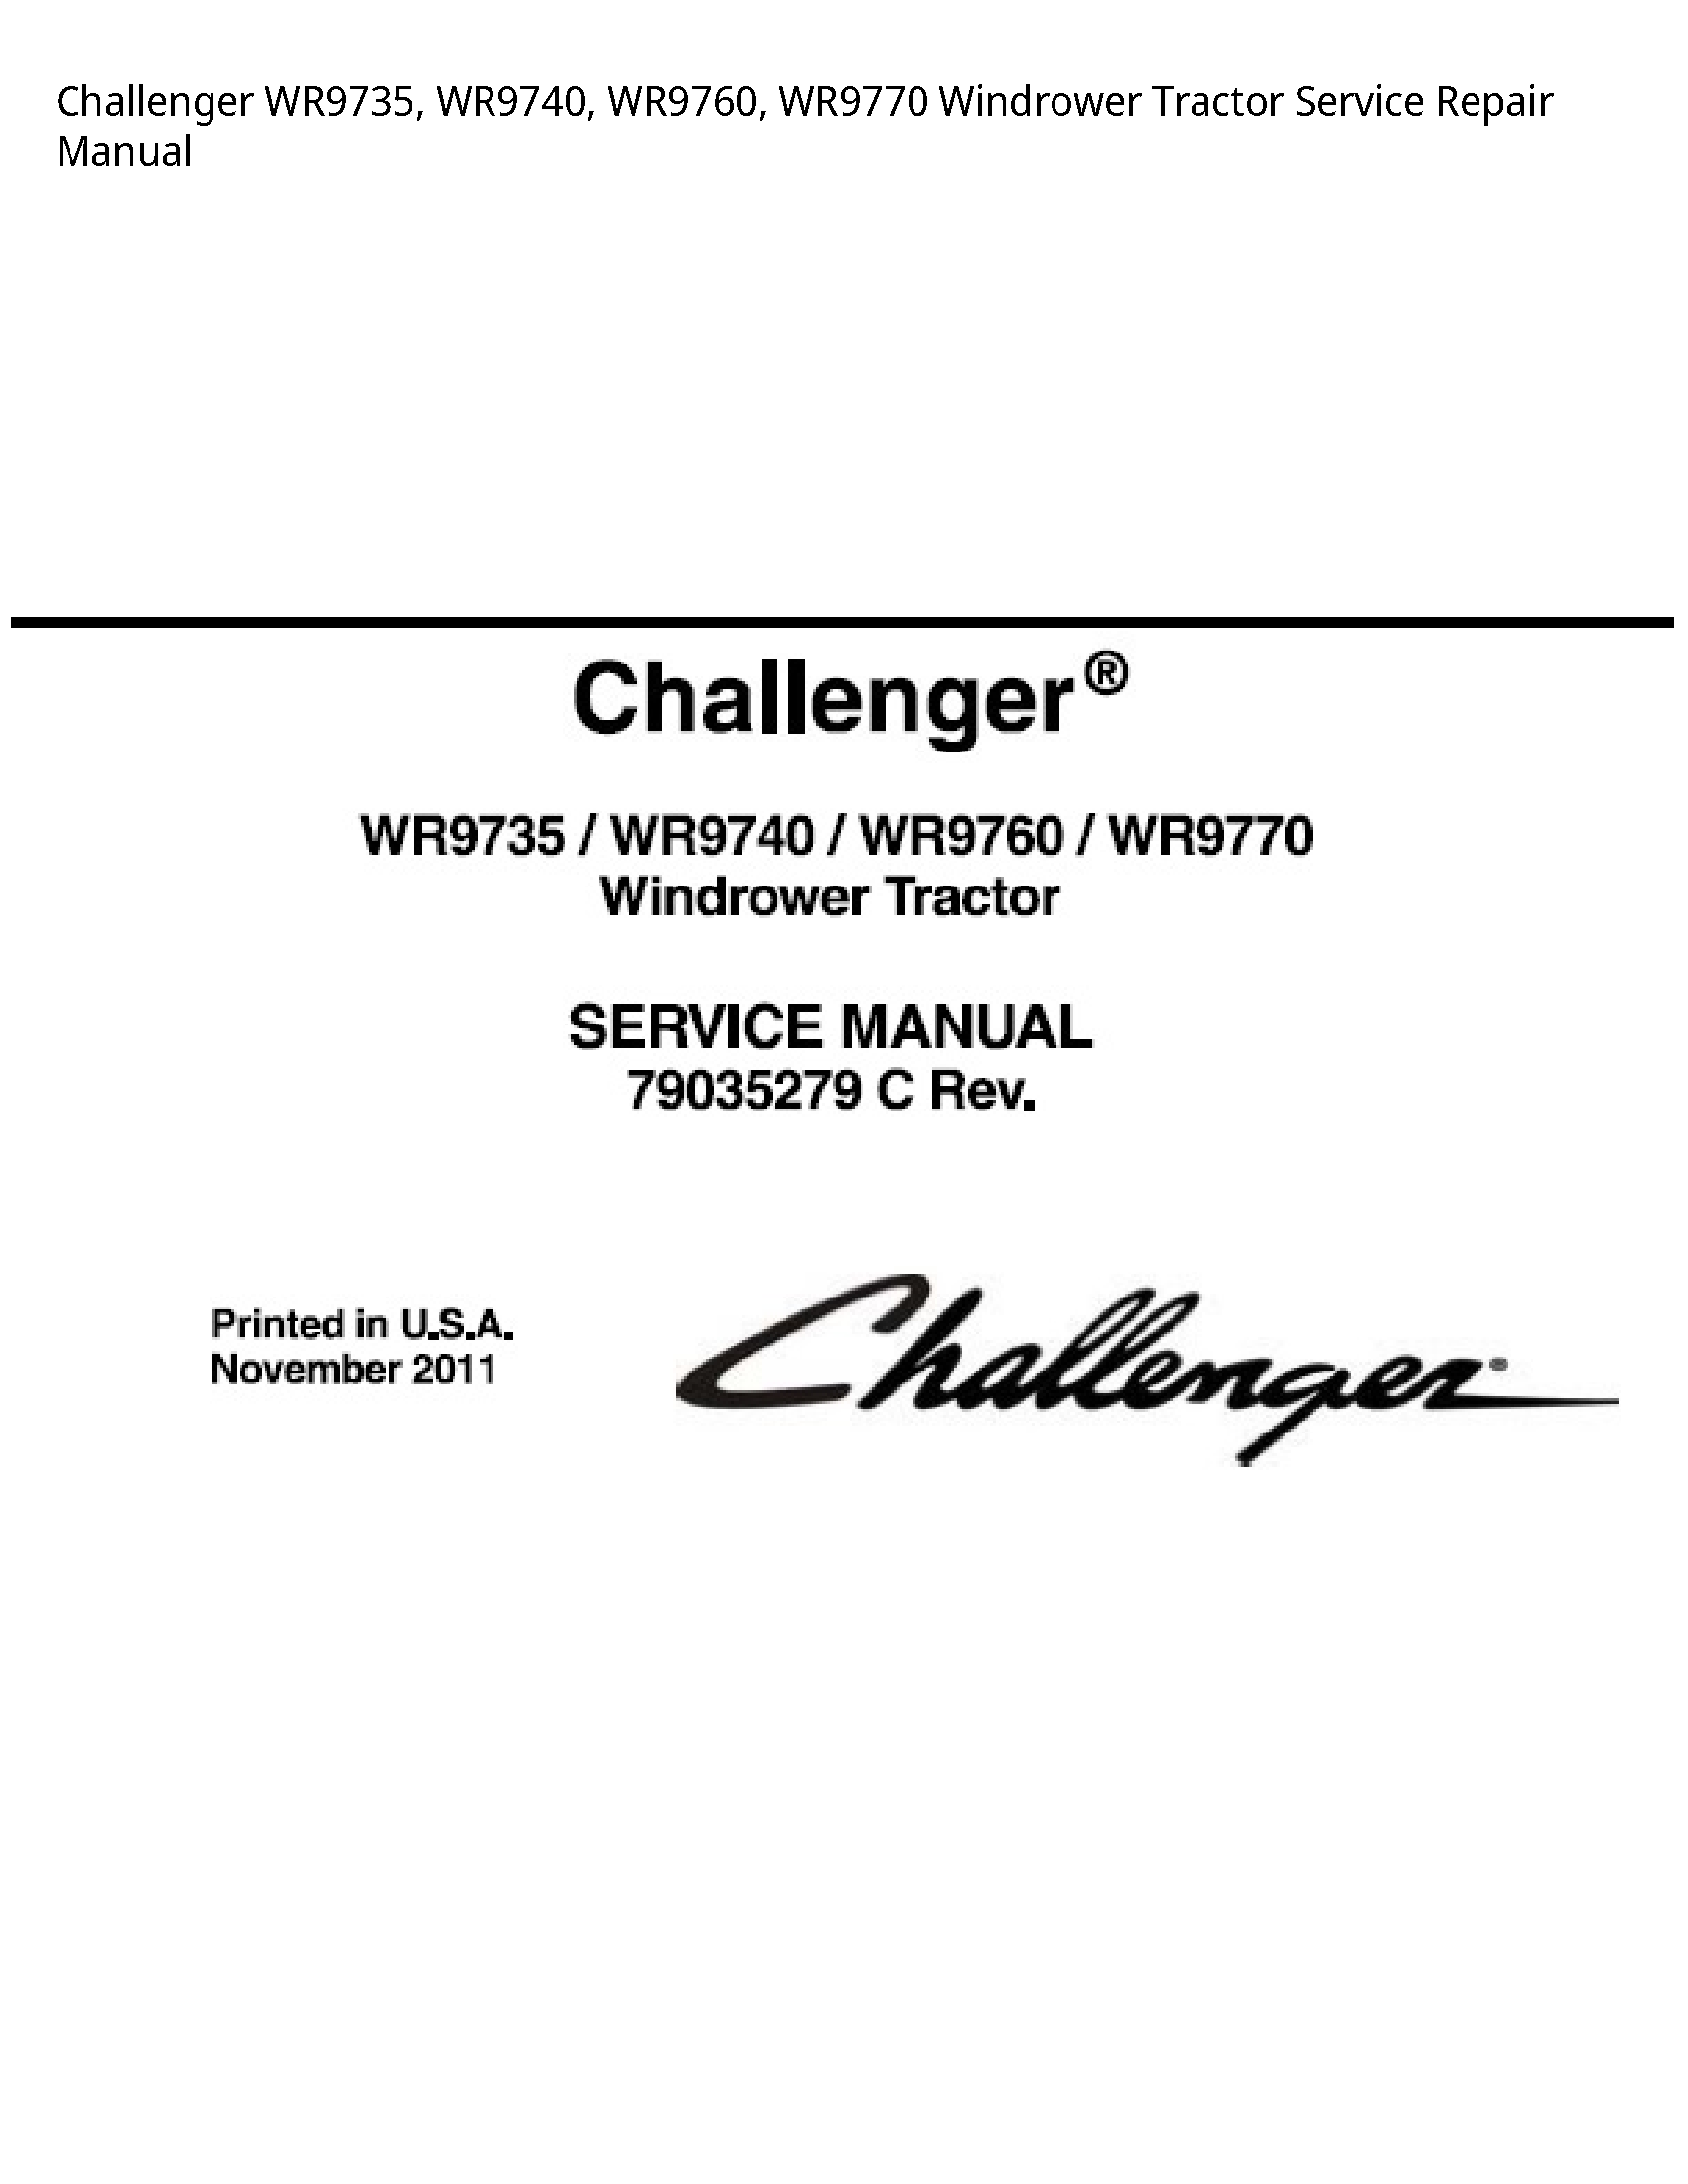 Challenger WR9735 Windrower Tractor manual